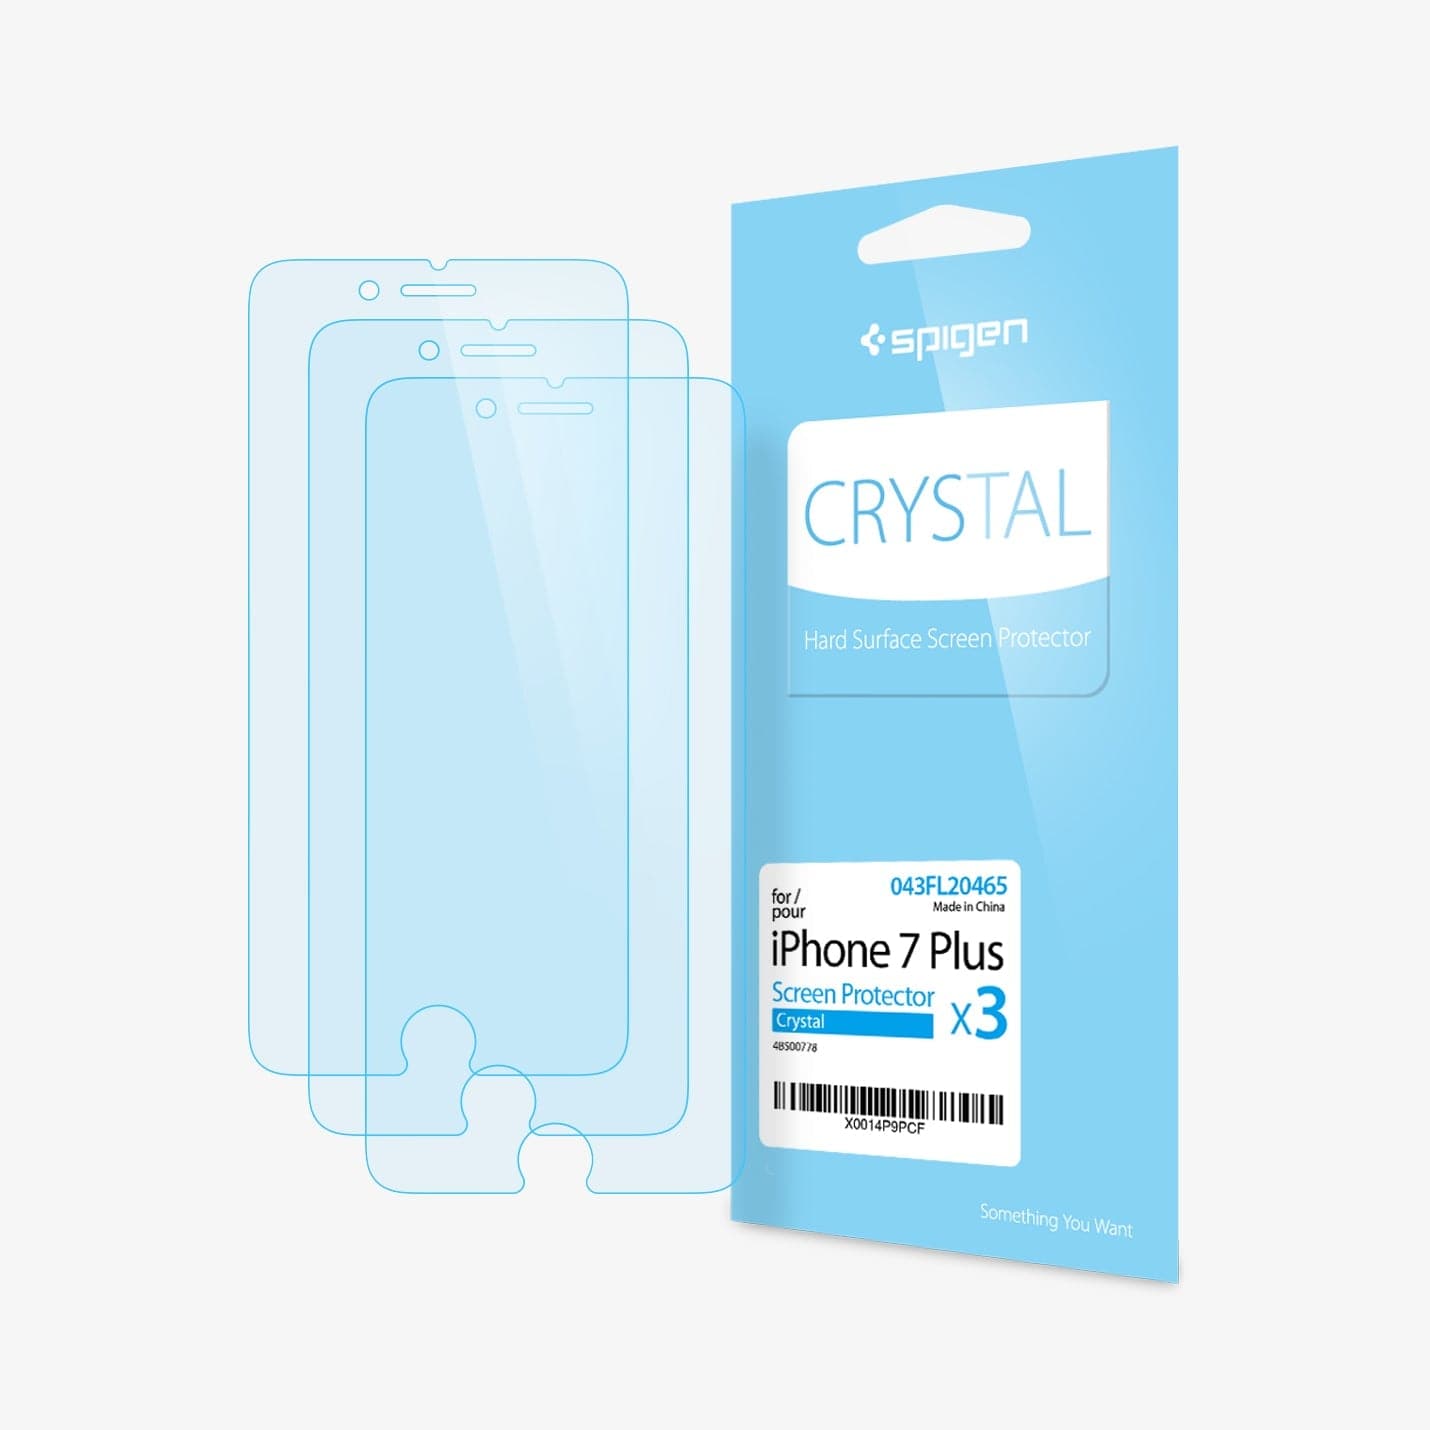 043FL20465 - iPhone 7 Plus Crystal Screen Protector showing 3 screen protectors and packaging